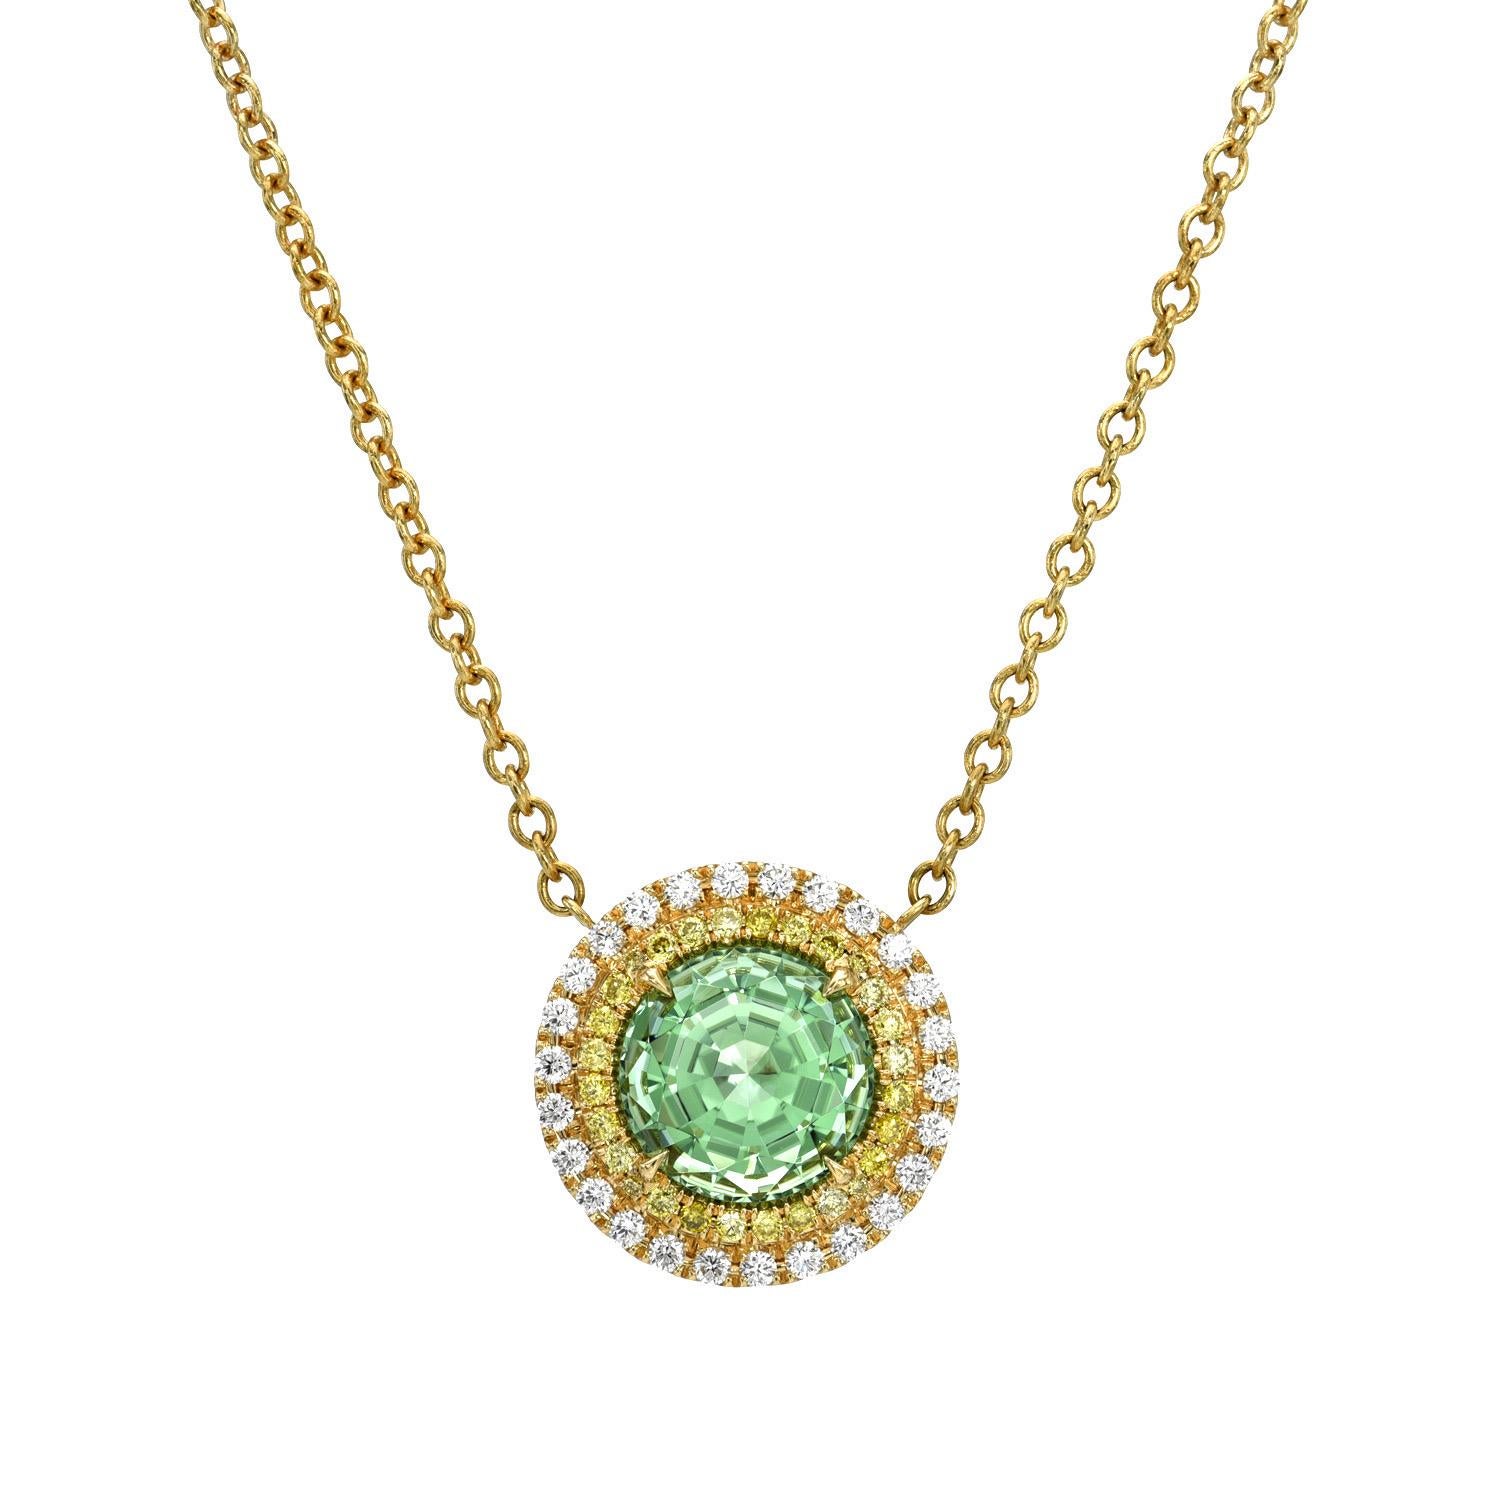 Contemporary Mint Green Tourmaline Necklace 3.56 Carat Round For Sale